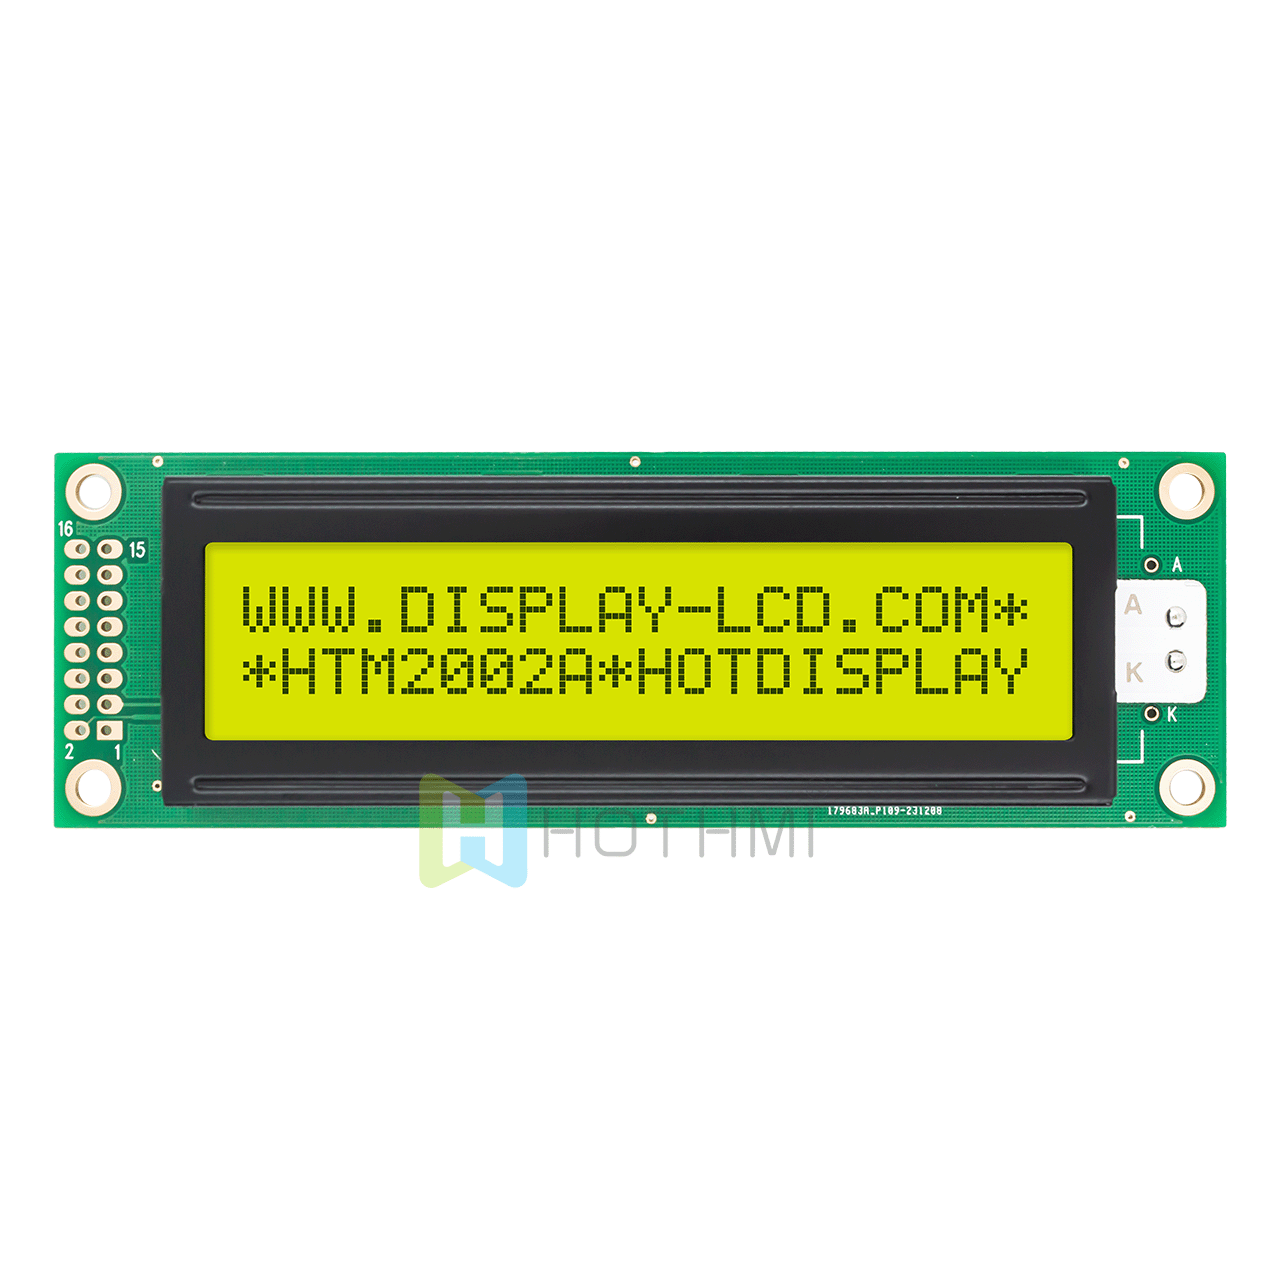 Arduino | 2X20 character monochrome LCD Module| STN yellow/green display with yellow/green backlight | 5.0V